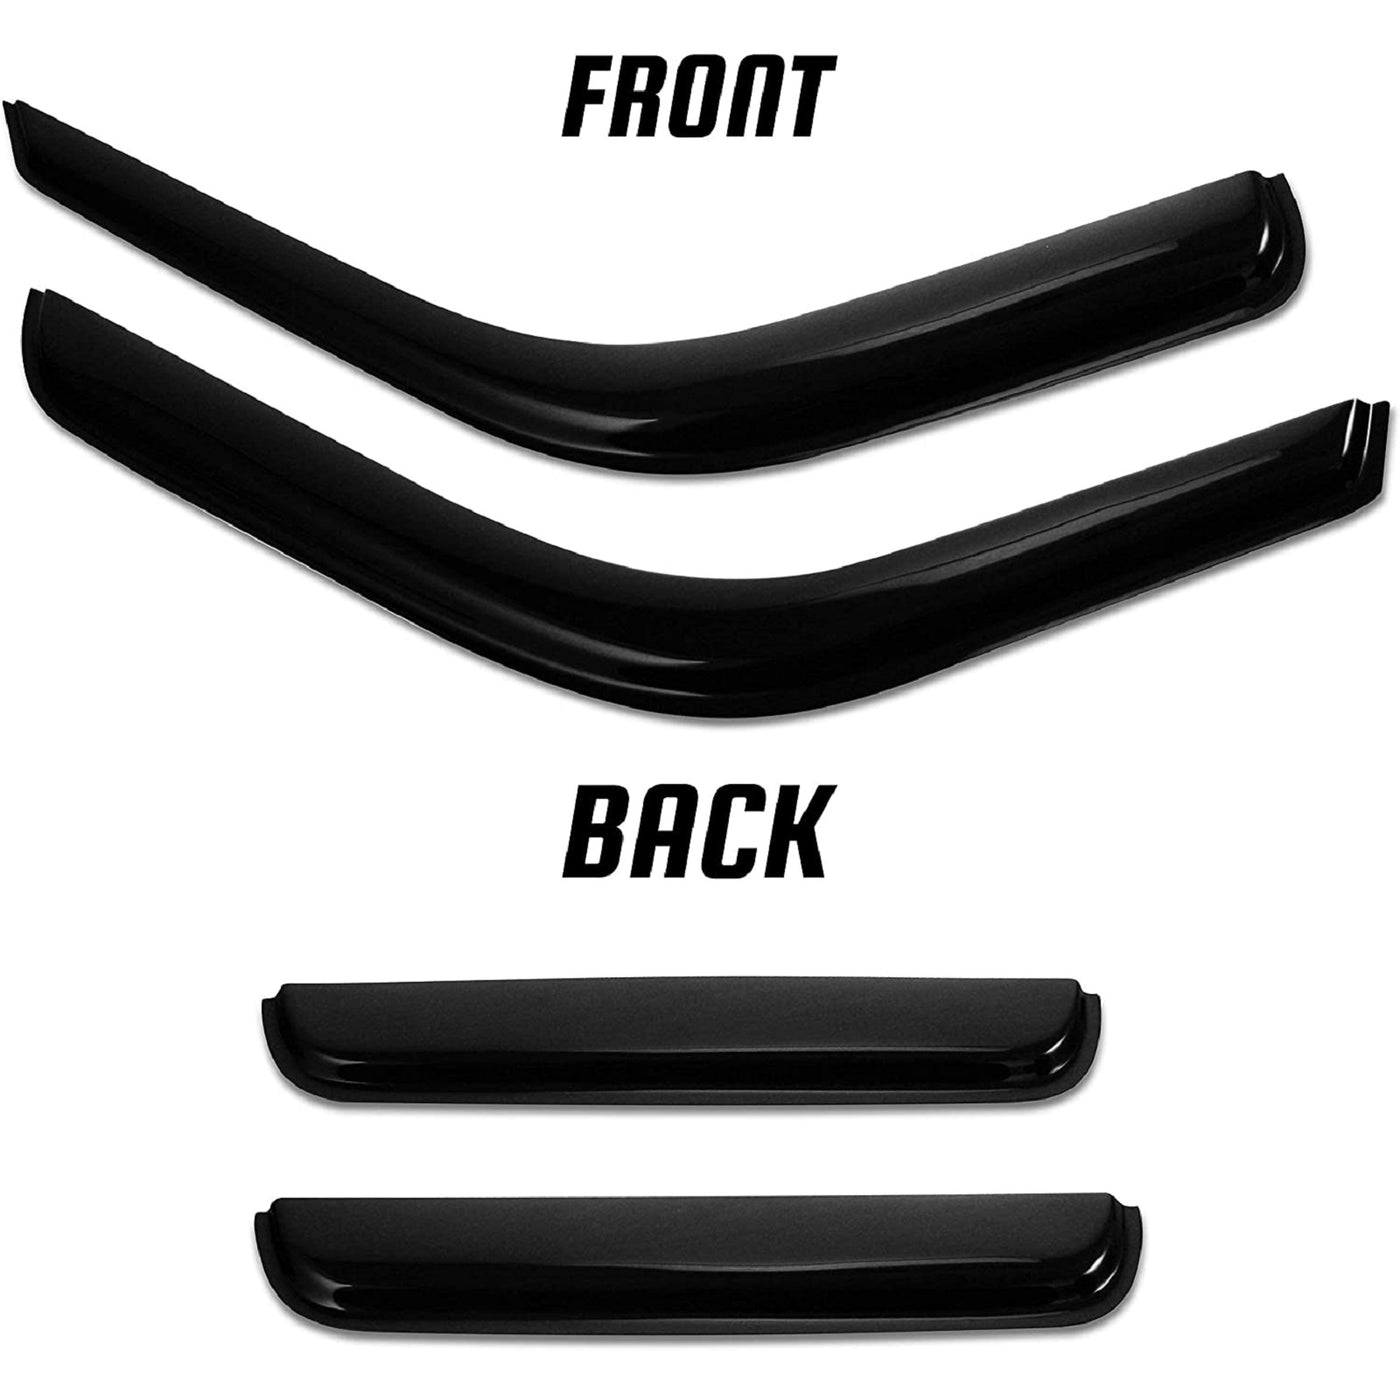 JSP Ford ford F-250 350 450 Super Duty Extended Cab & Supercab 1999 - 2016 Tape-On Car Window Deflector Rain Guards, 218078